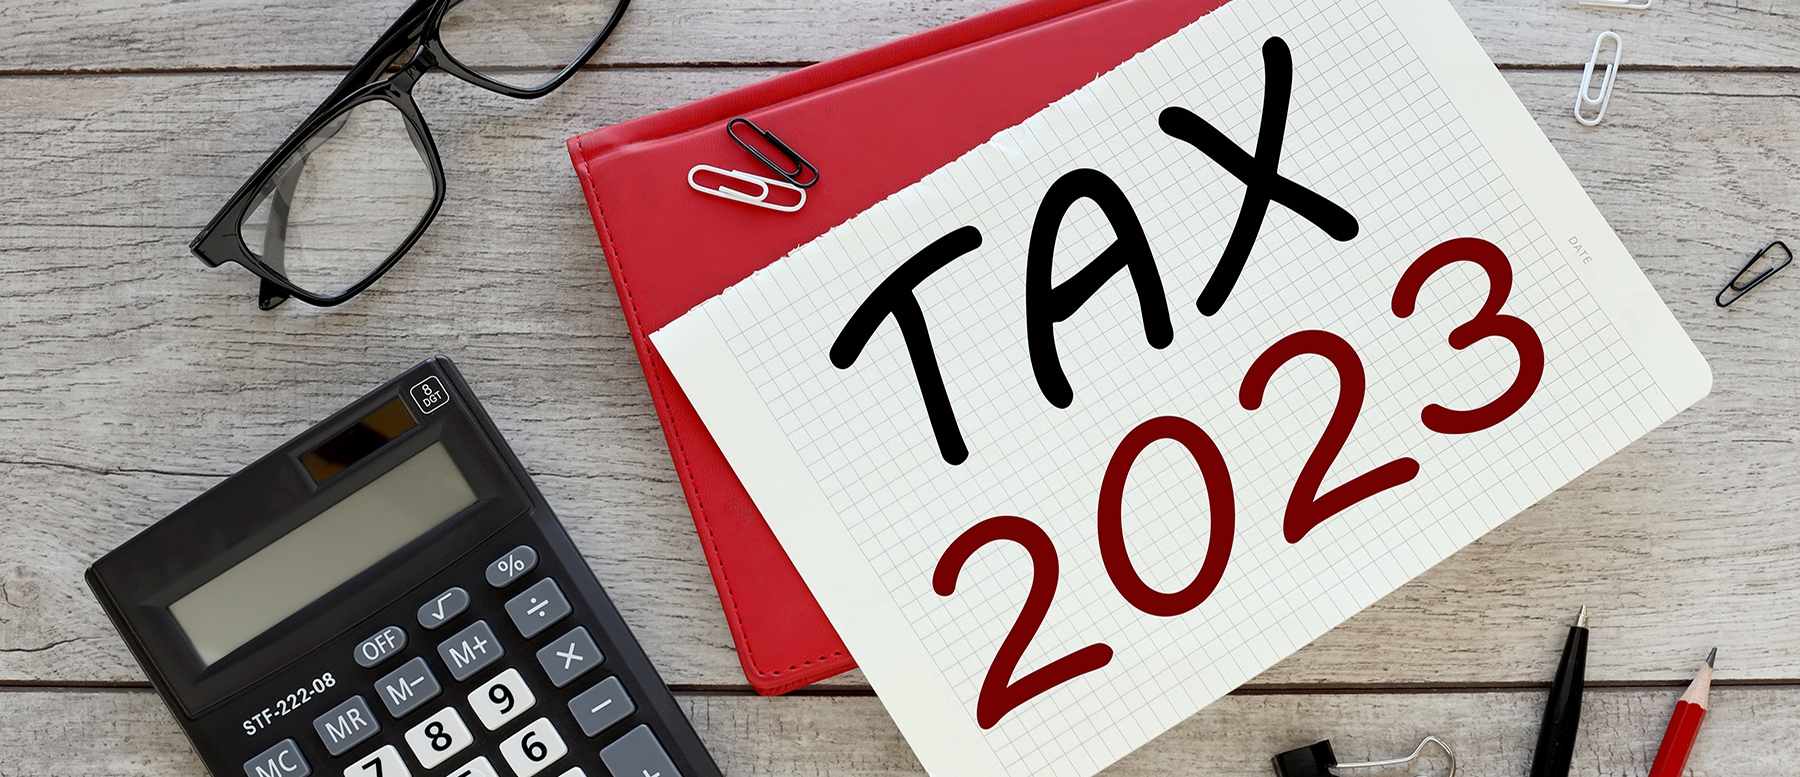 Have Your Important Tax Infomation Ready and Organized